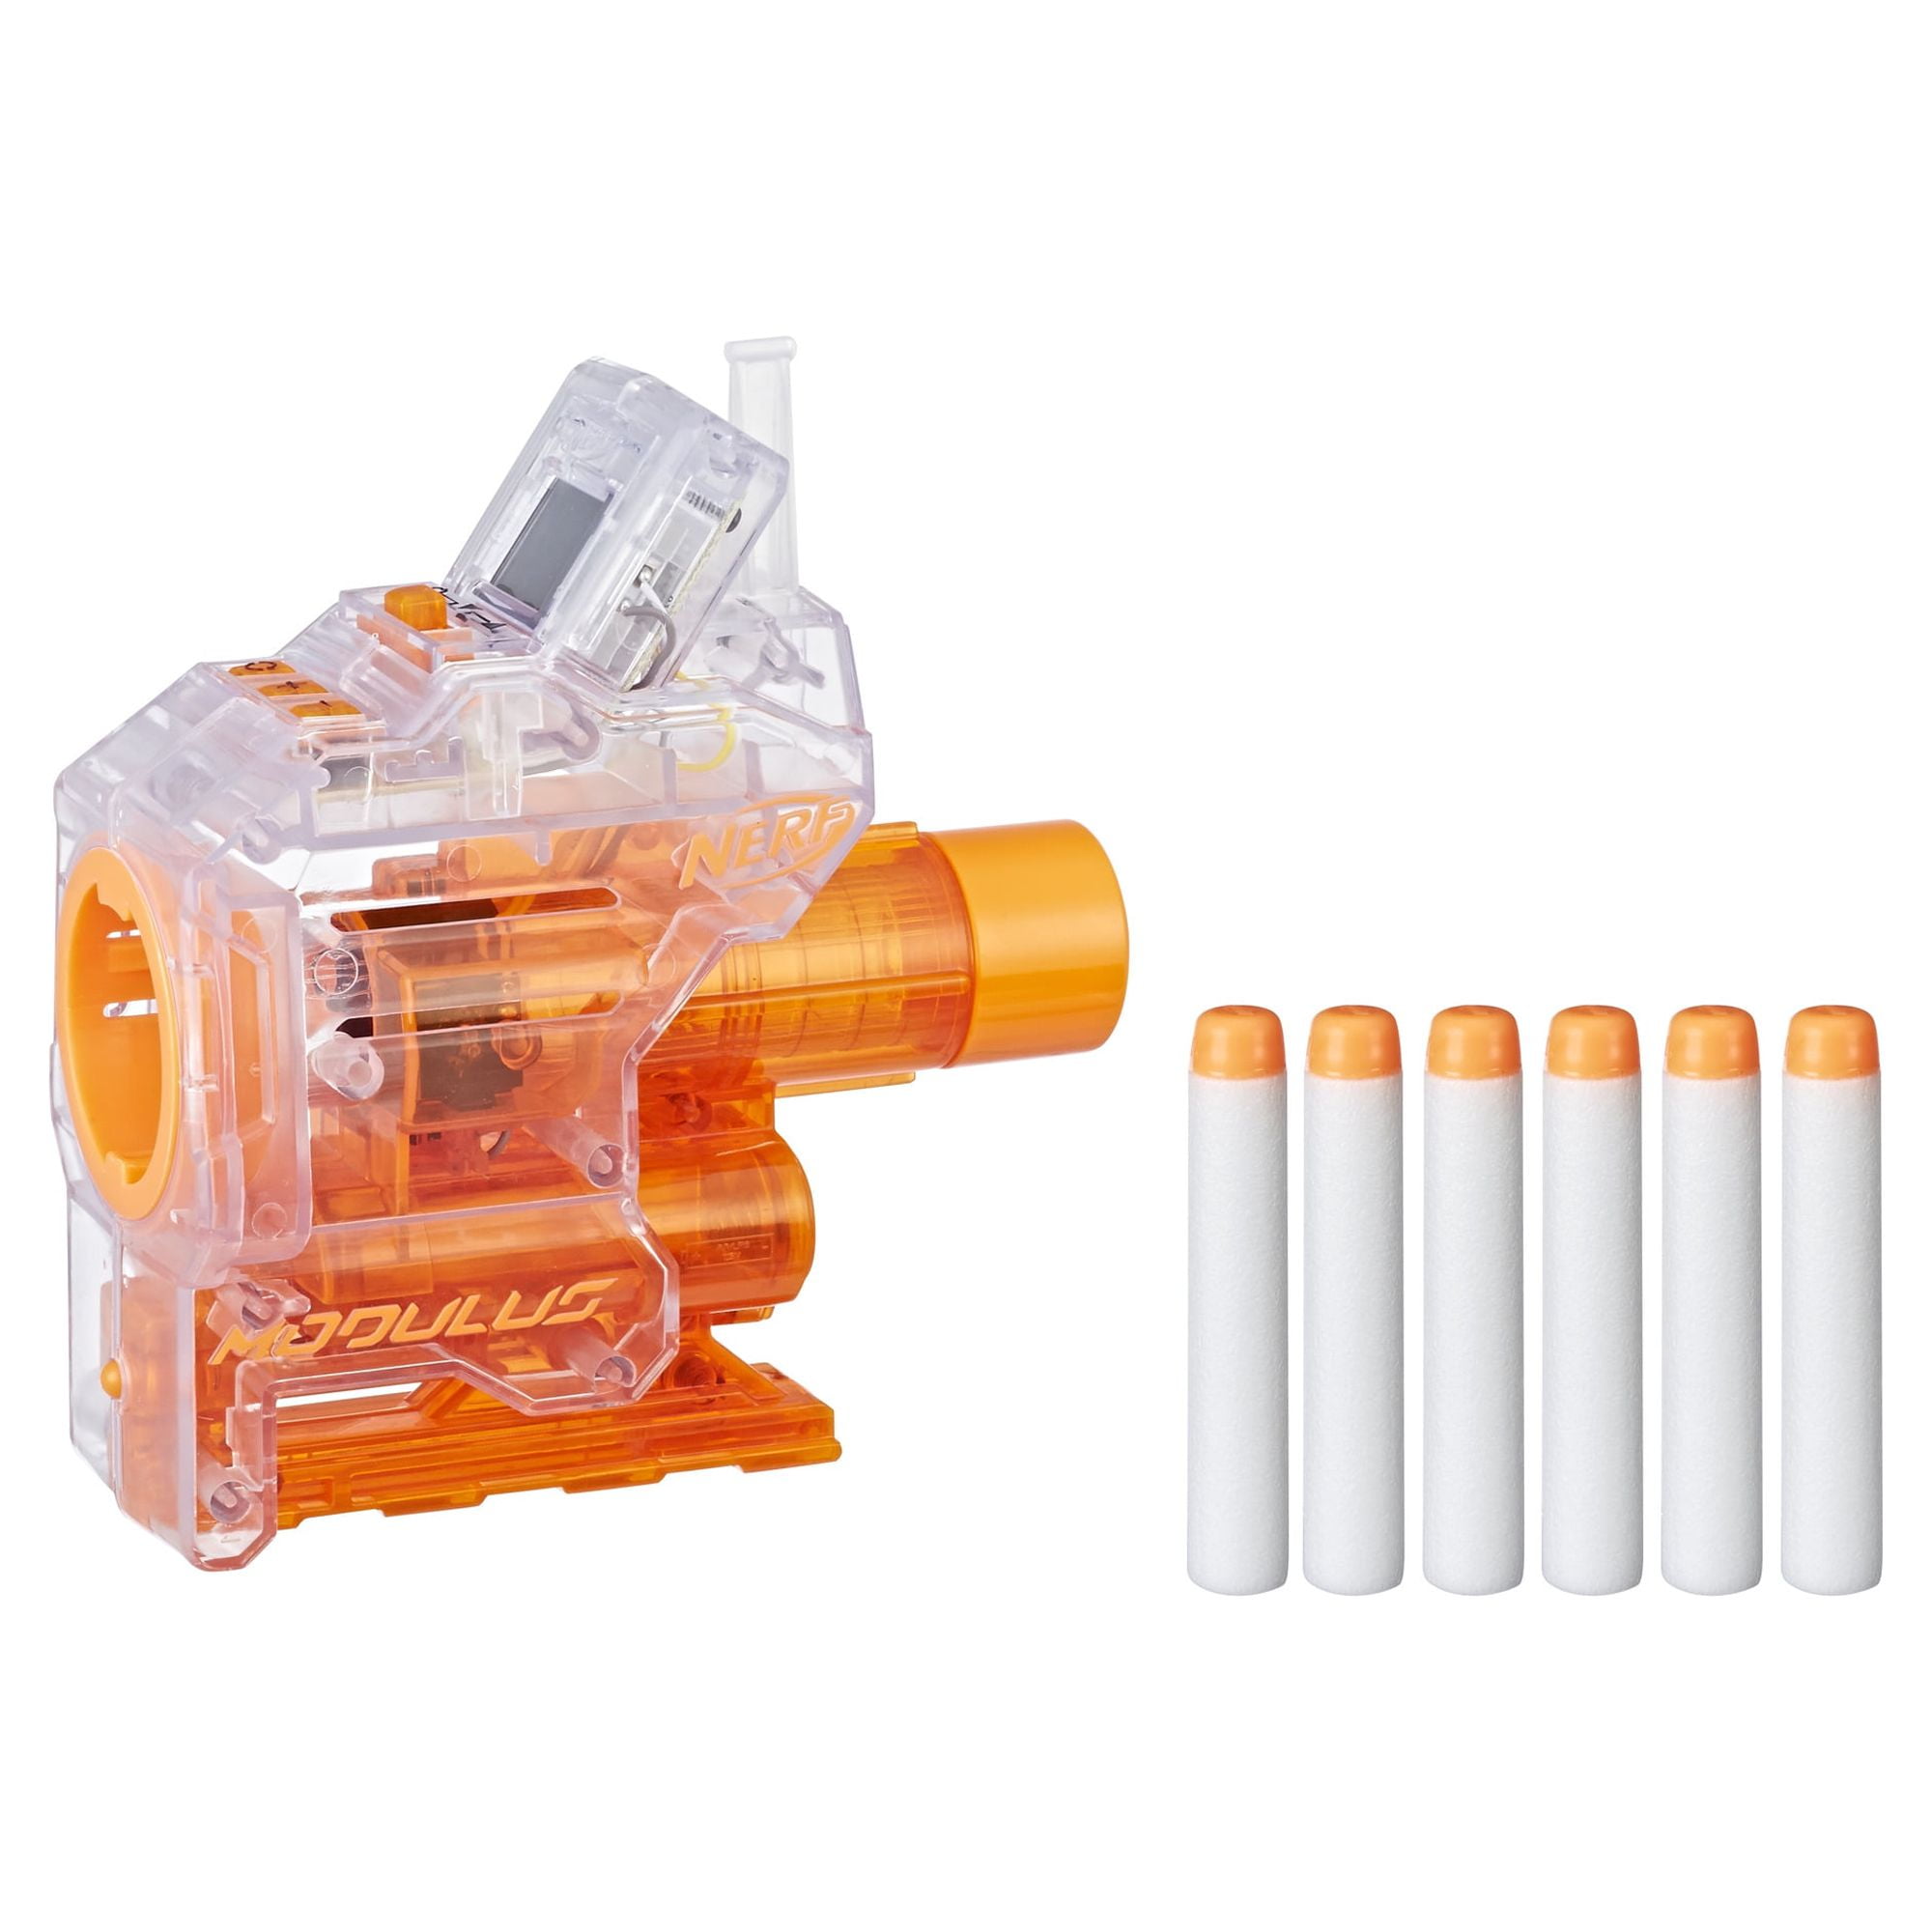 RealTree: Foam Blaster Set - NKOK, Pump Action Launches Foam Balls,  Includes 10 Foam Balls, 6 Cups For Targets, Ages 6+ 